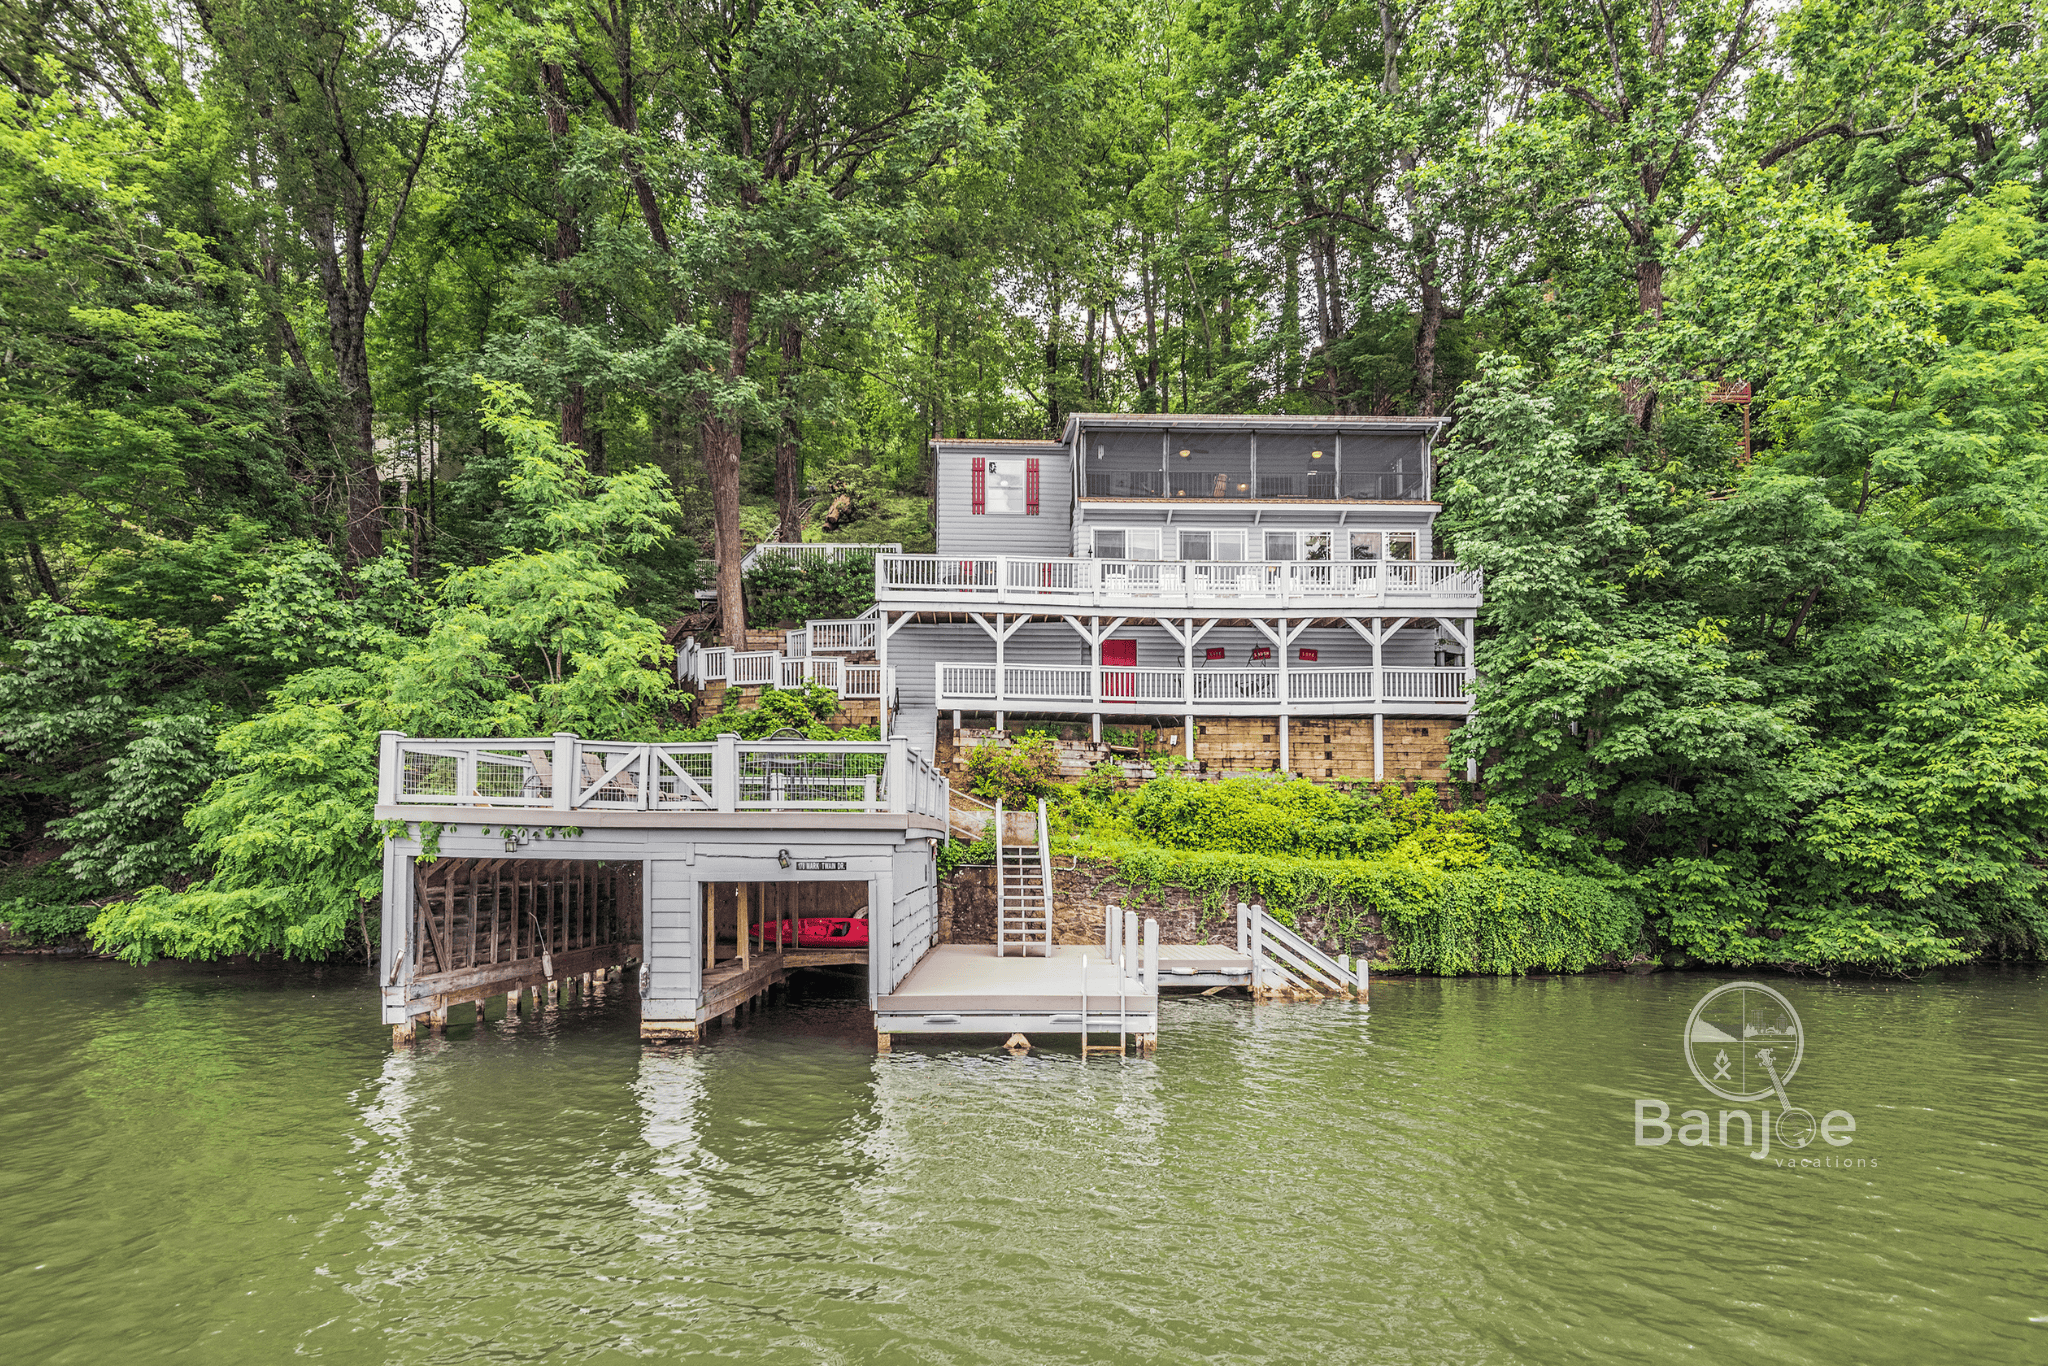 View of the Enchanted Cottage from the lake. (The boat house is currently under repair.)